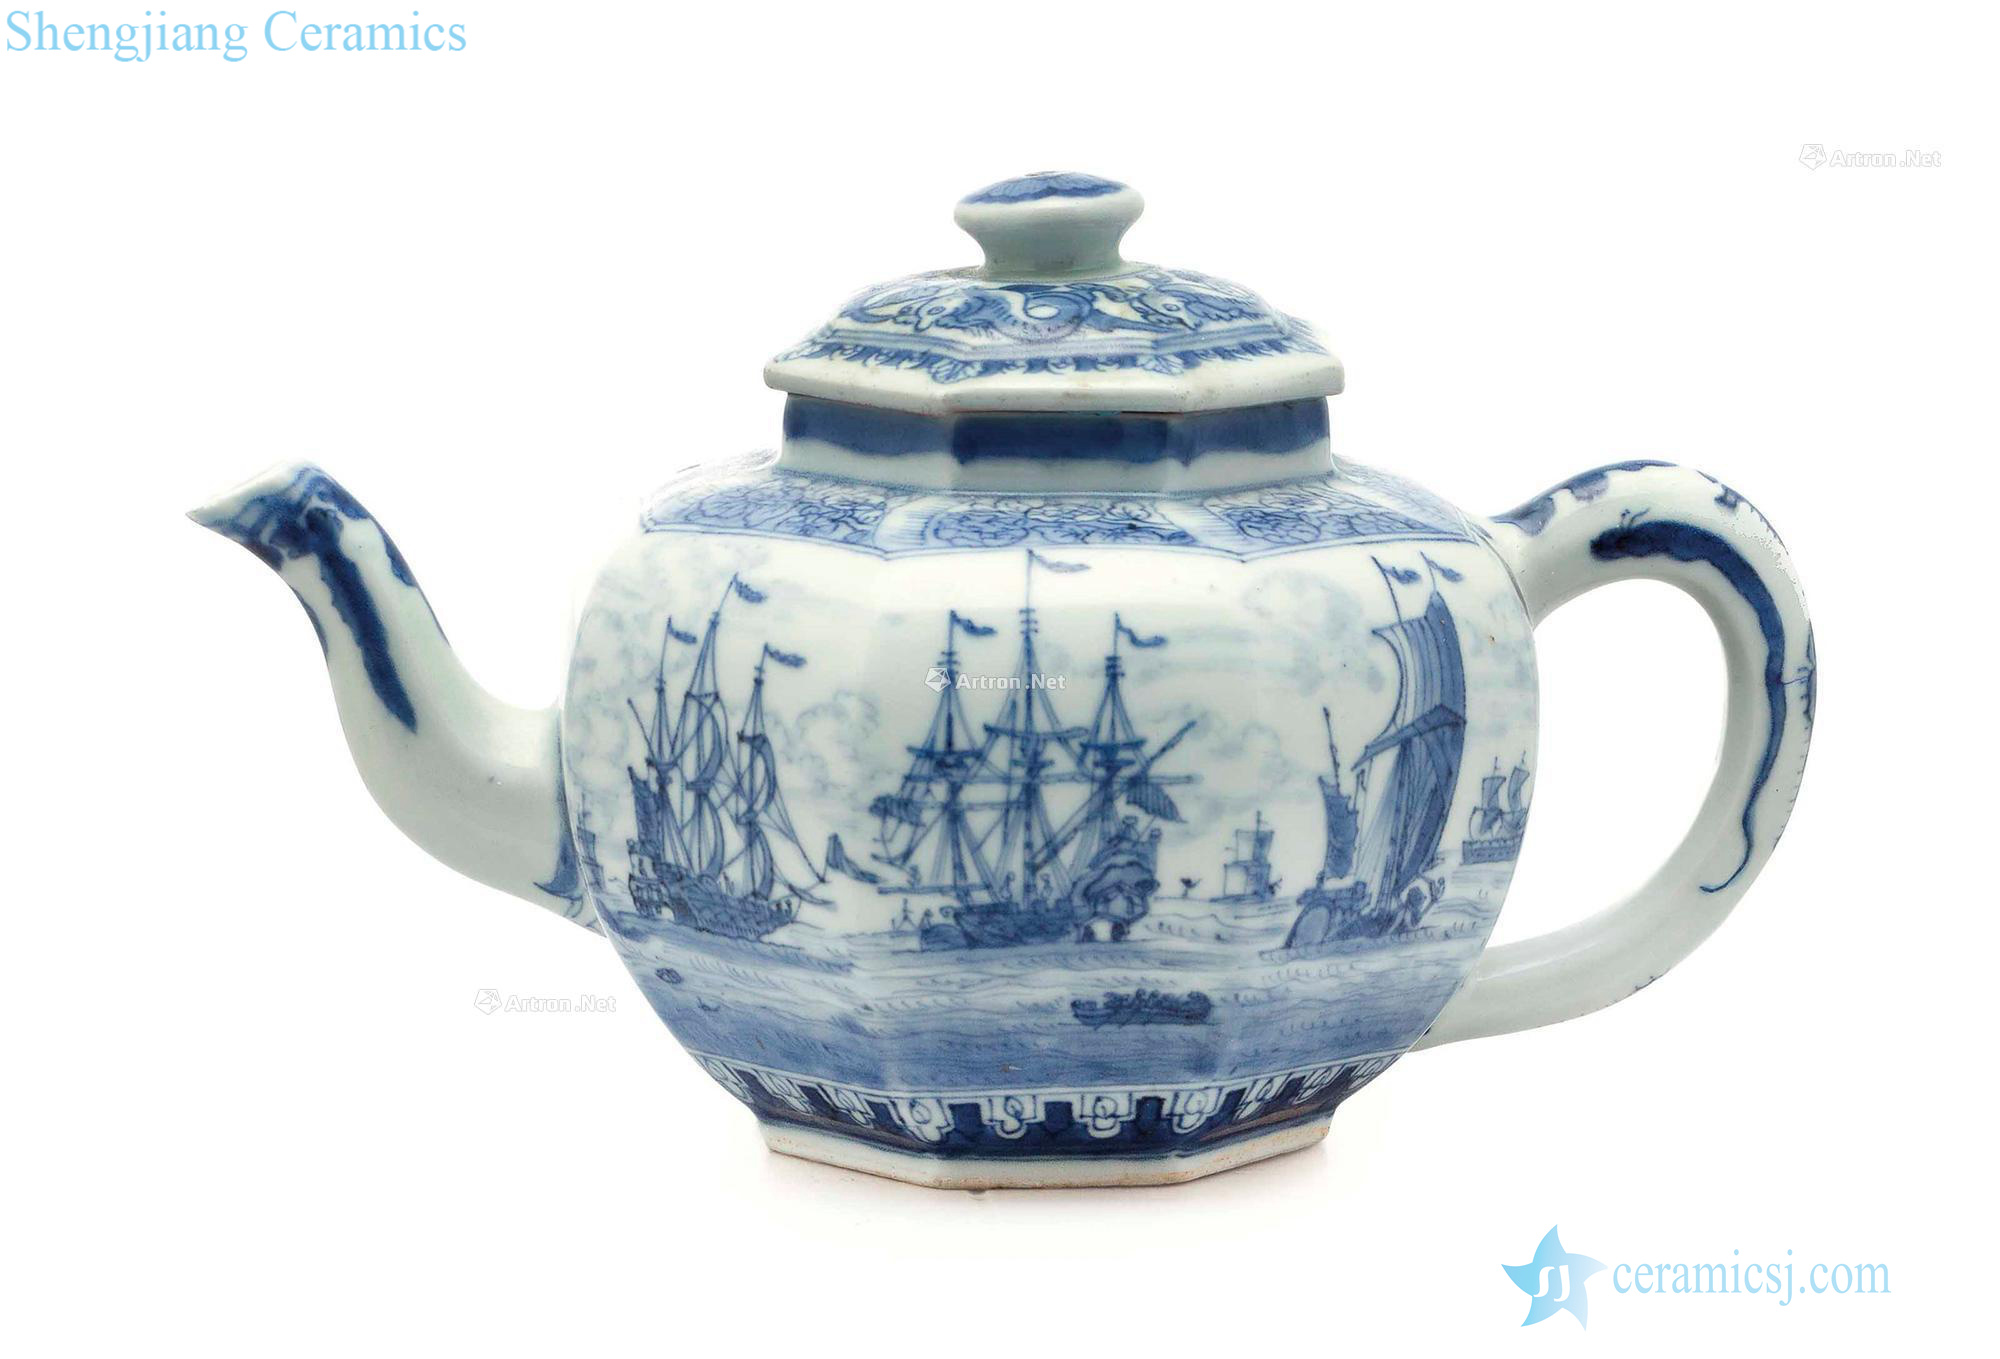 About 1700, A VERY RARE JAPANESE ARITA BLUE AND WHITE EUROPEAN SUBJECT TEAPOT AND COVER